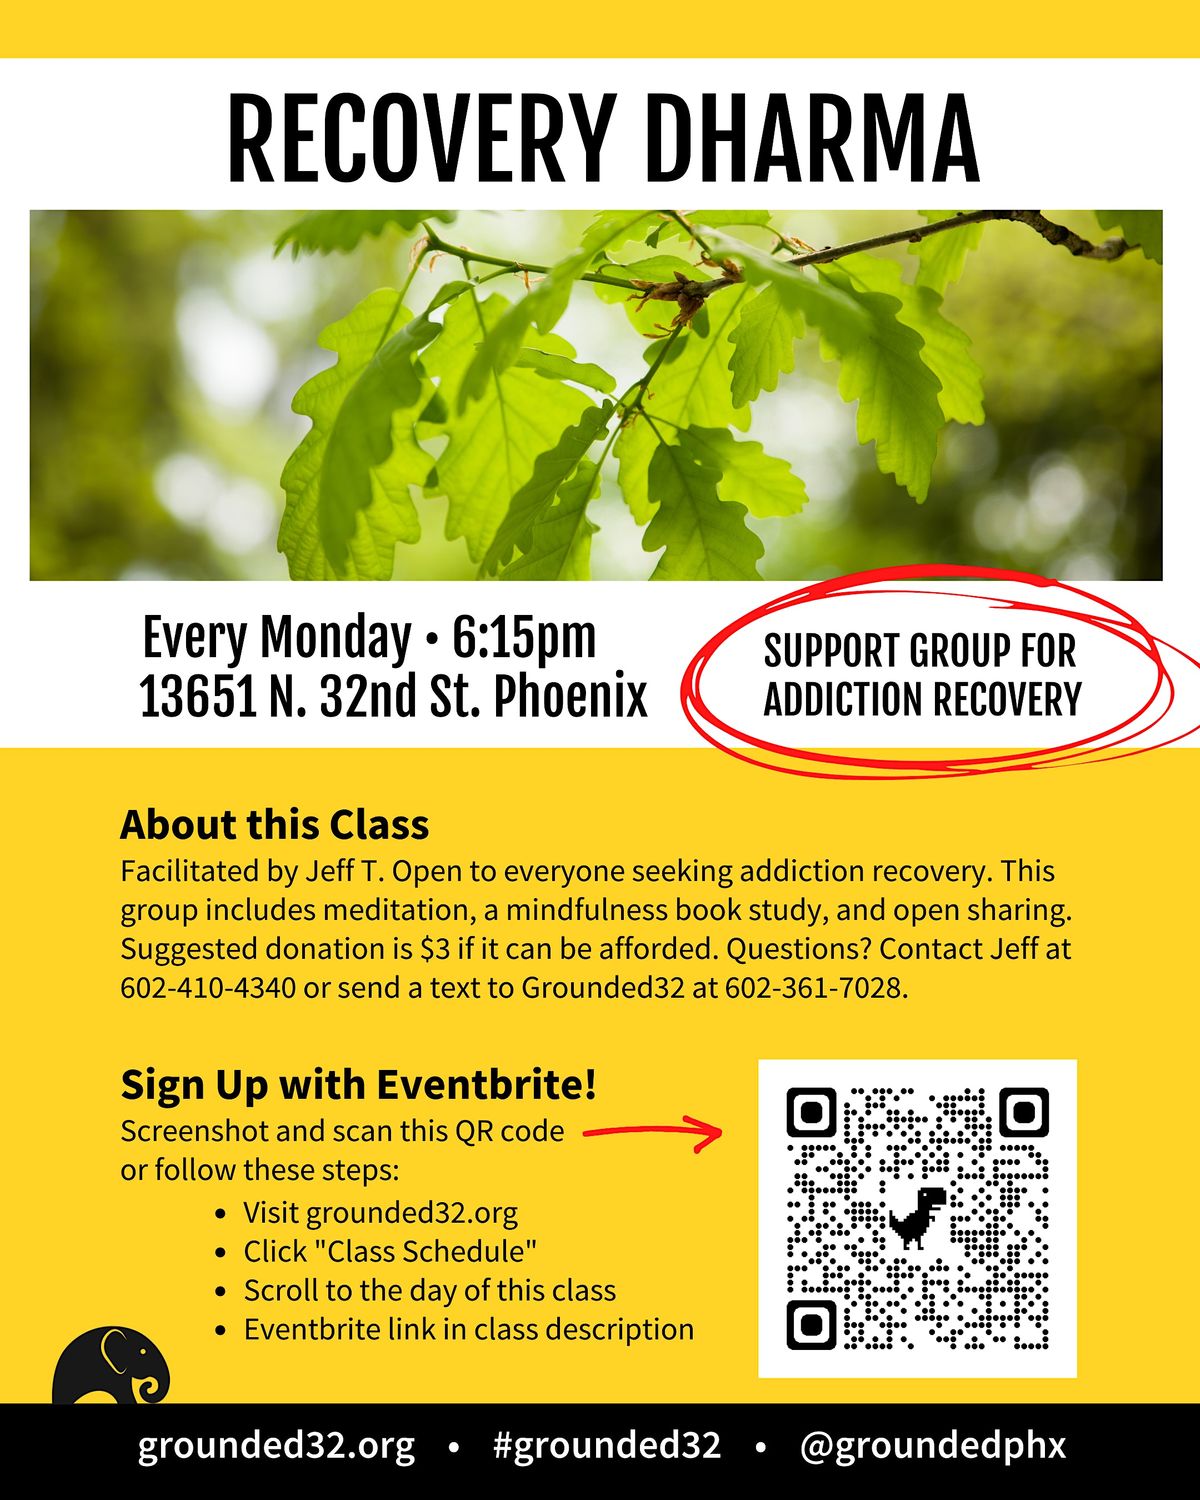 Dharma Recovery Addiction Support (begins at 6:15pm)